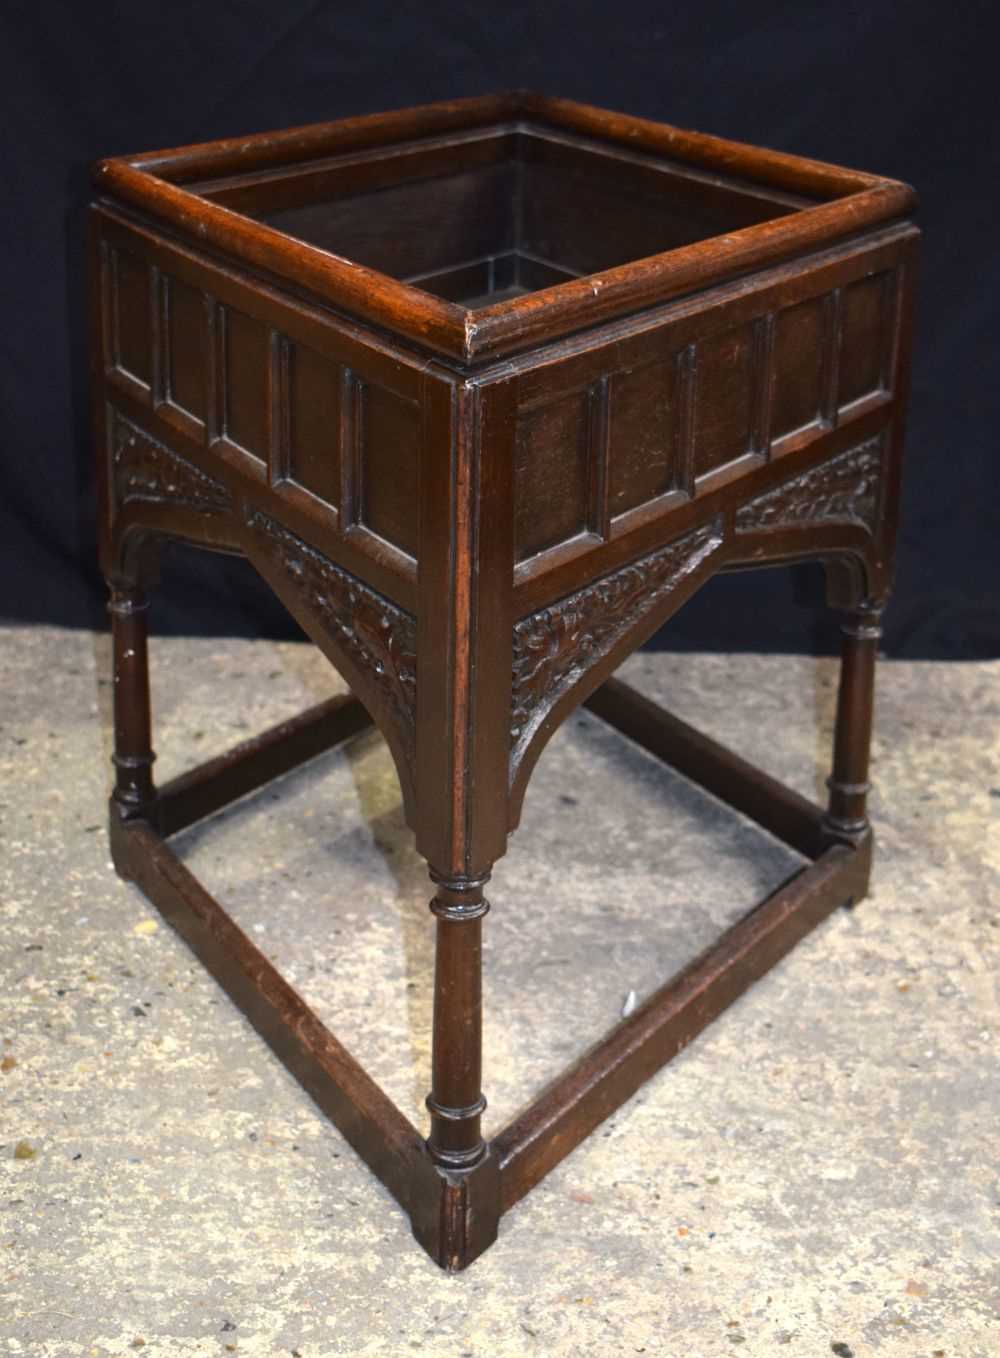 An unusual 19th Century Rhombus shaped carved mahogany planter 57 x 104 x 60 cm - Image 4 of 8